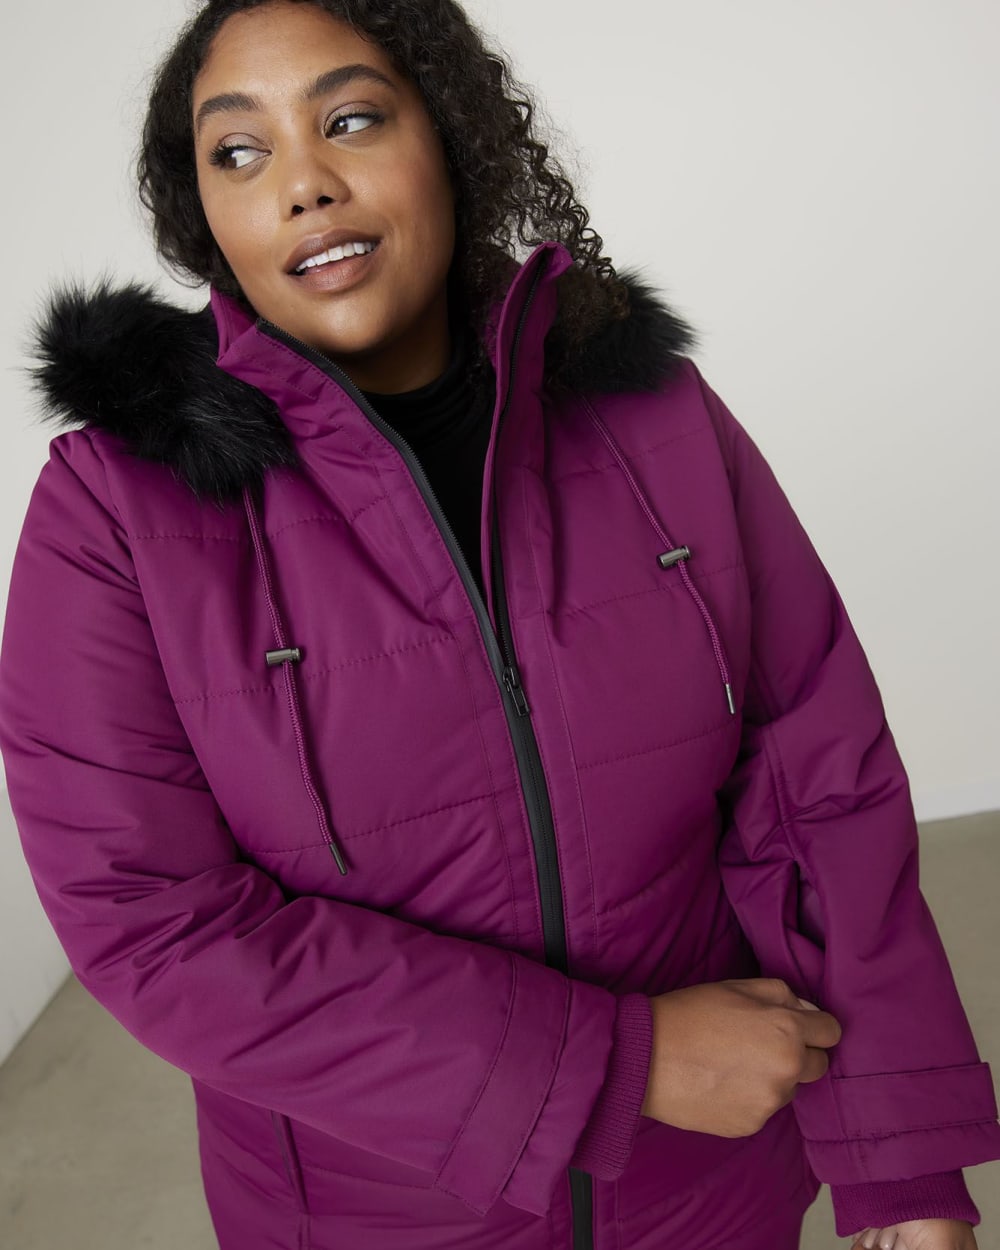 Responsible, Solid Snow Jacket with Multiple Cuts - Active Zone